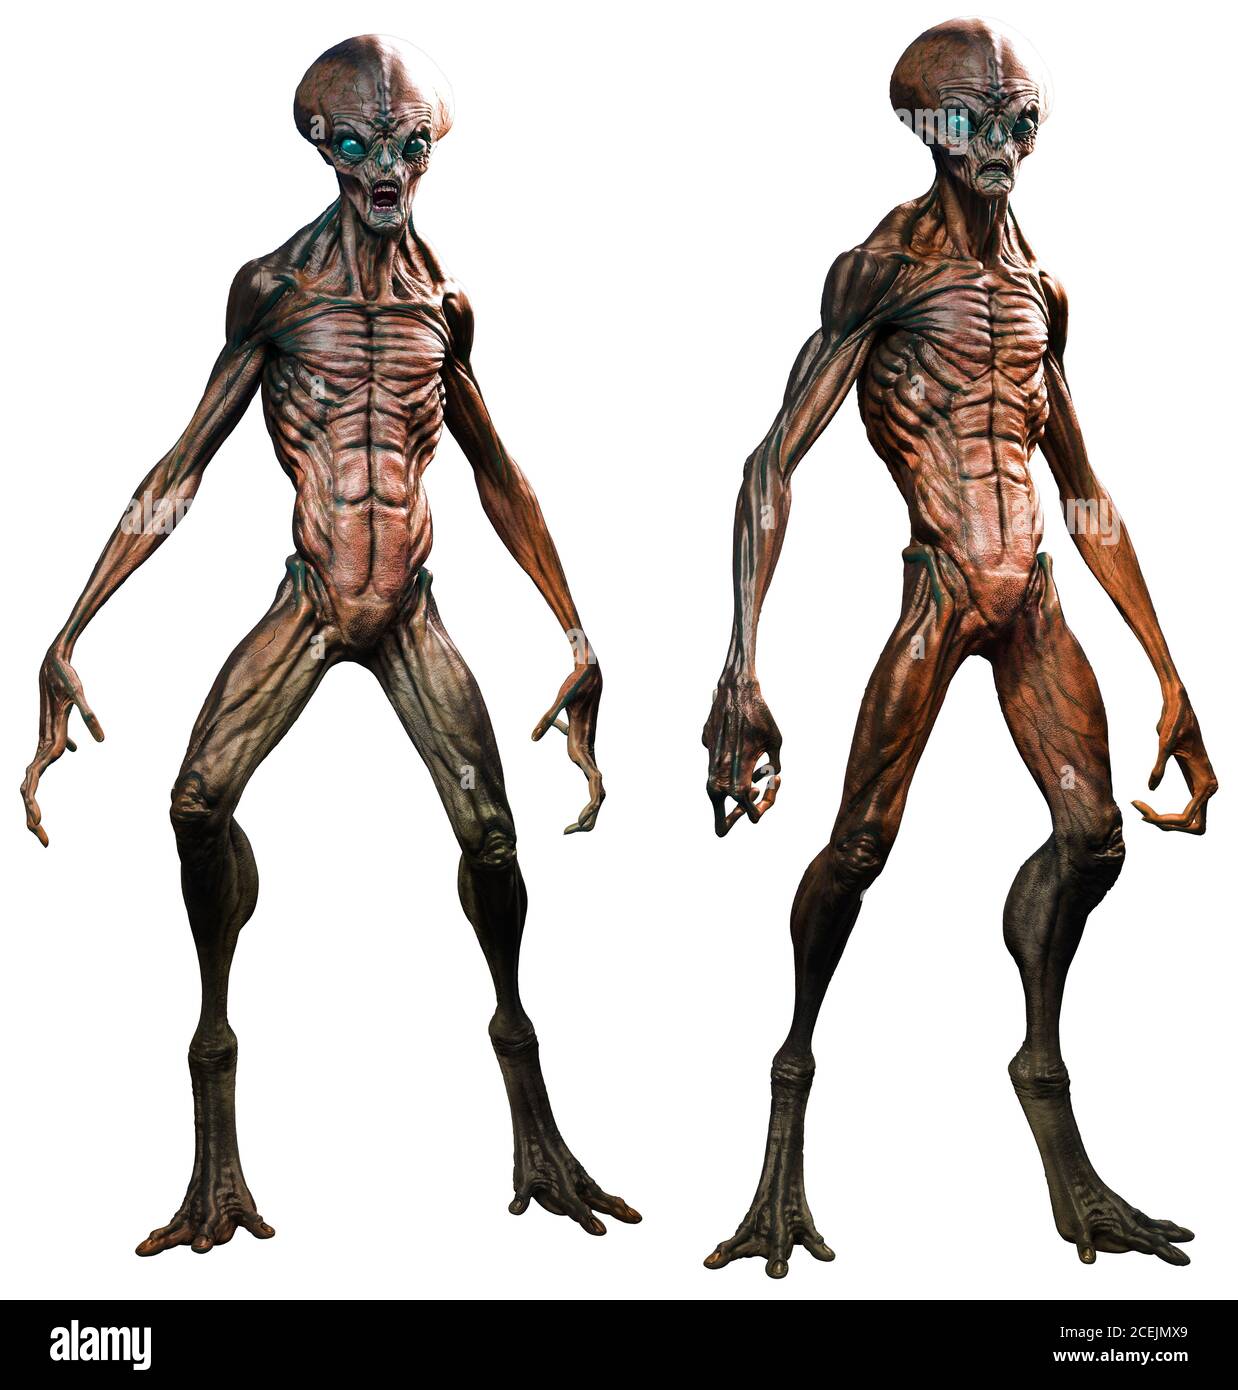 Aliens in standing poses 3D illustration Stock Photo